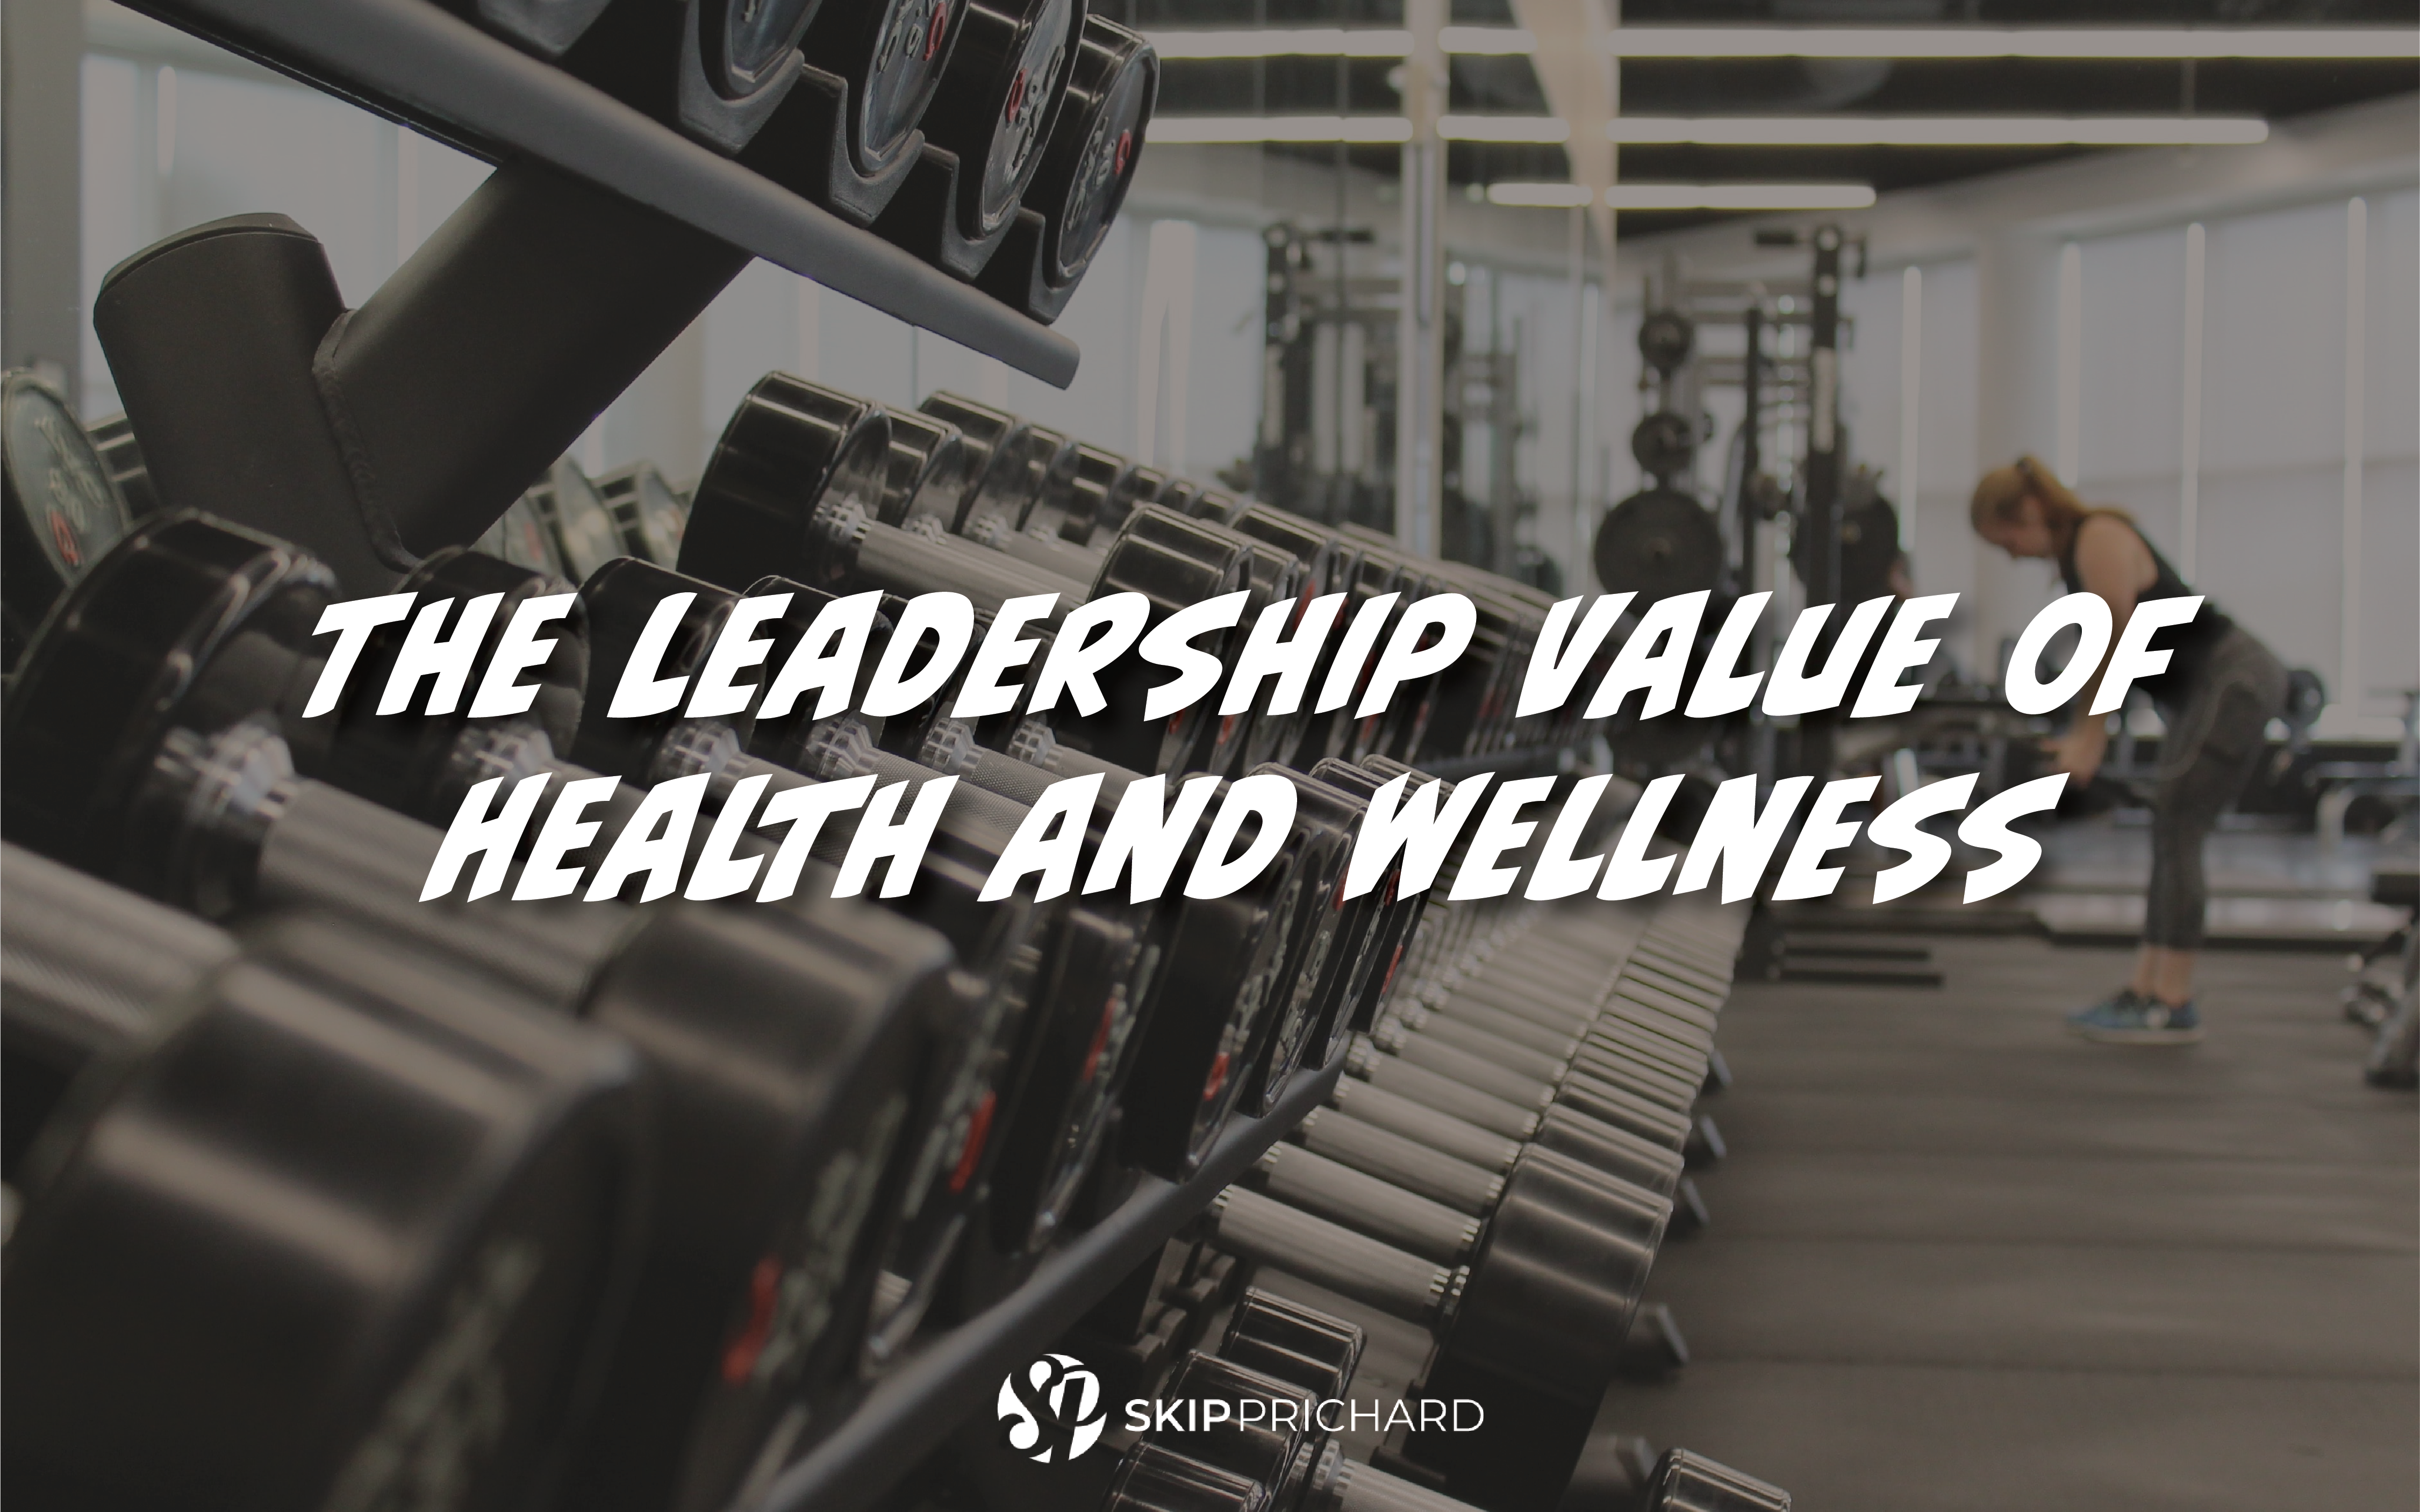 Aim Higher: The leadership value of health and wellness 